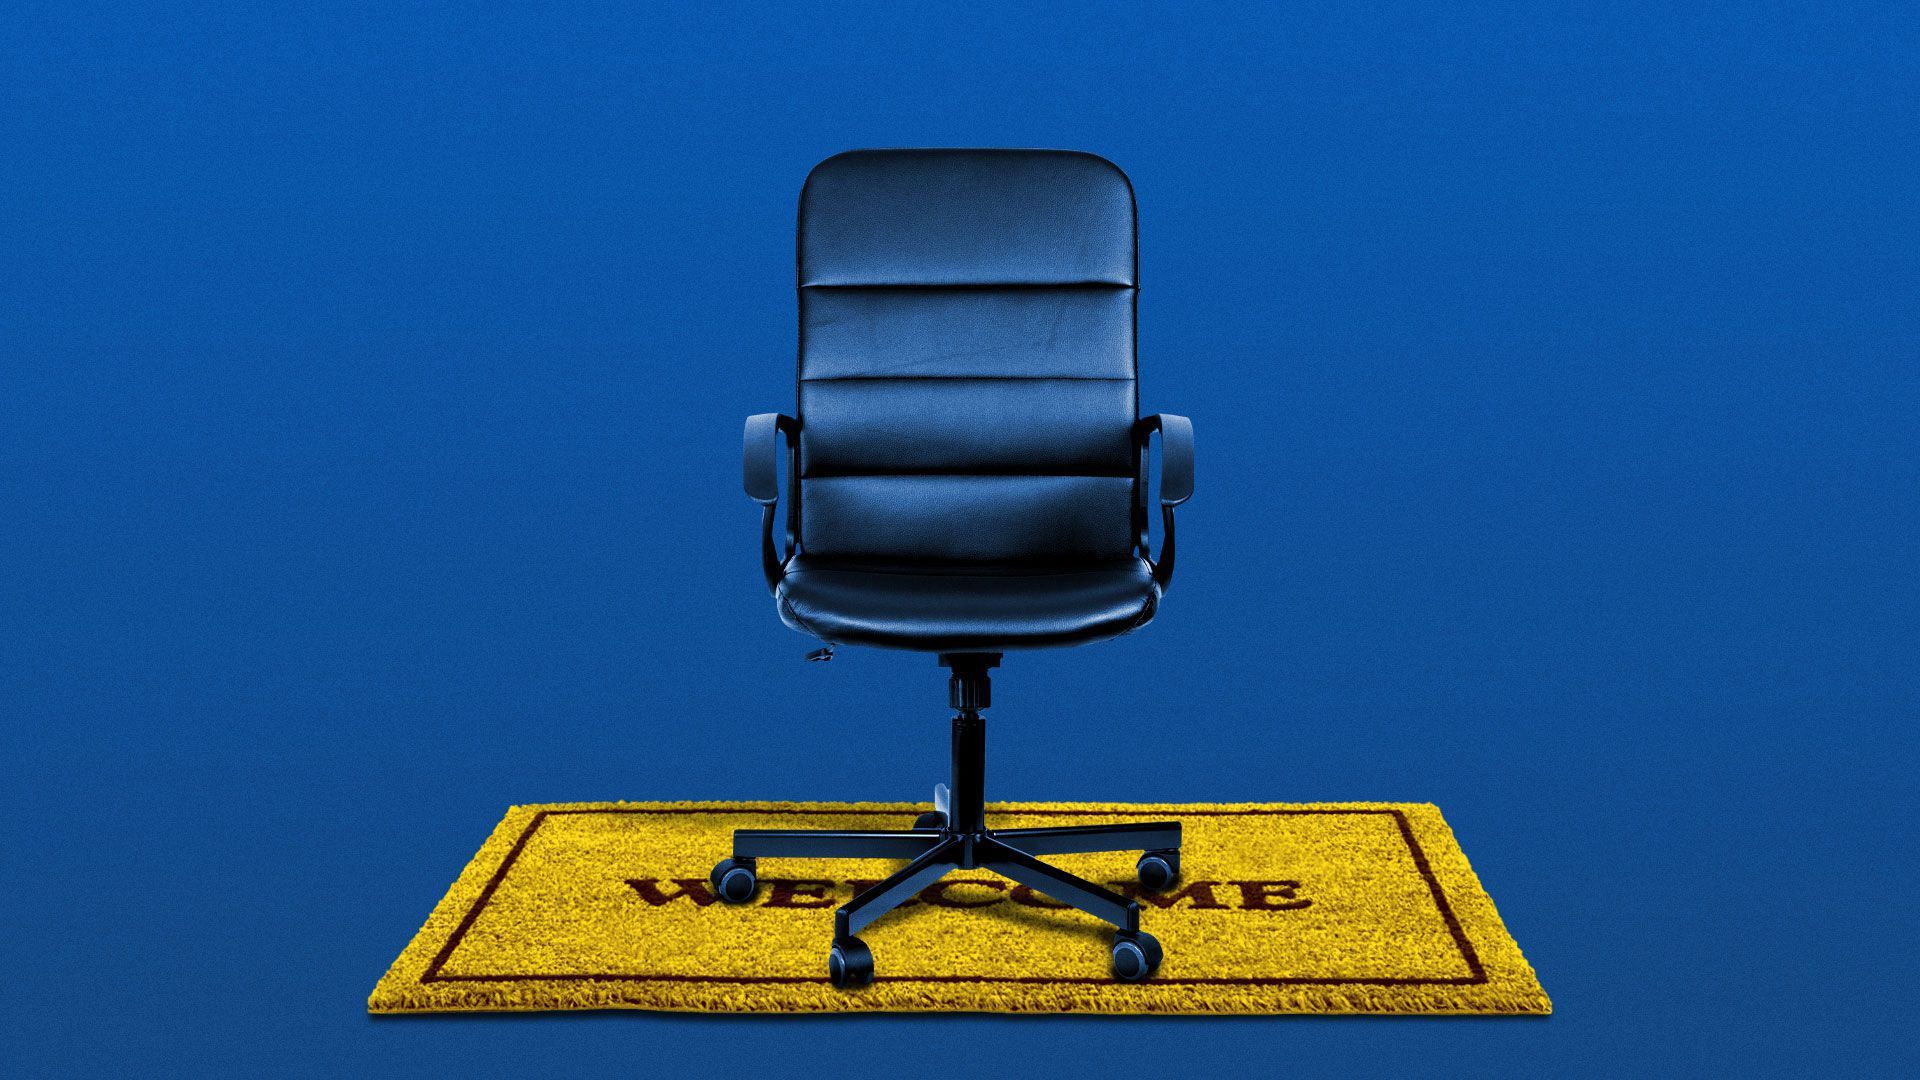 Illustration of an office chair on a welcome mat.